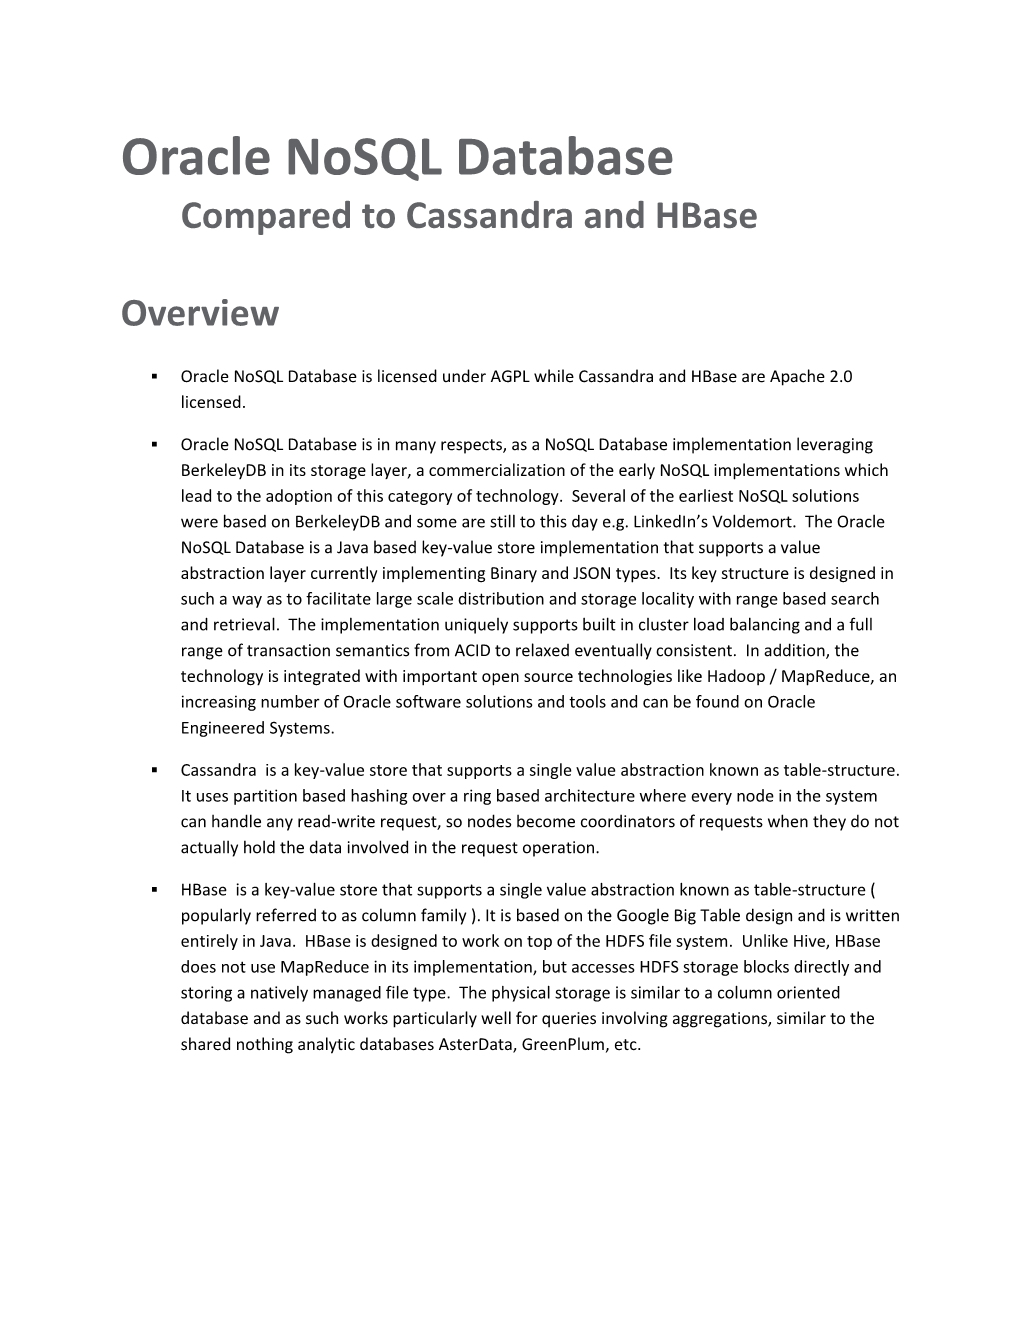 Oracle Nosql Database Compared to Cassandra and Hbase